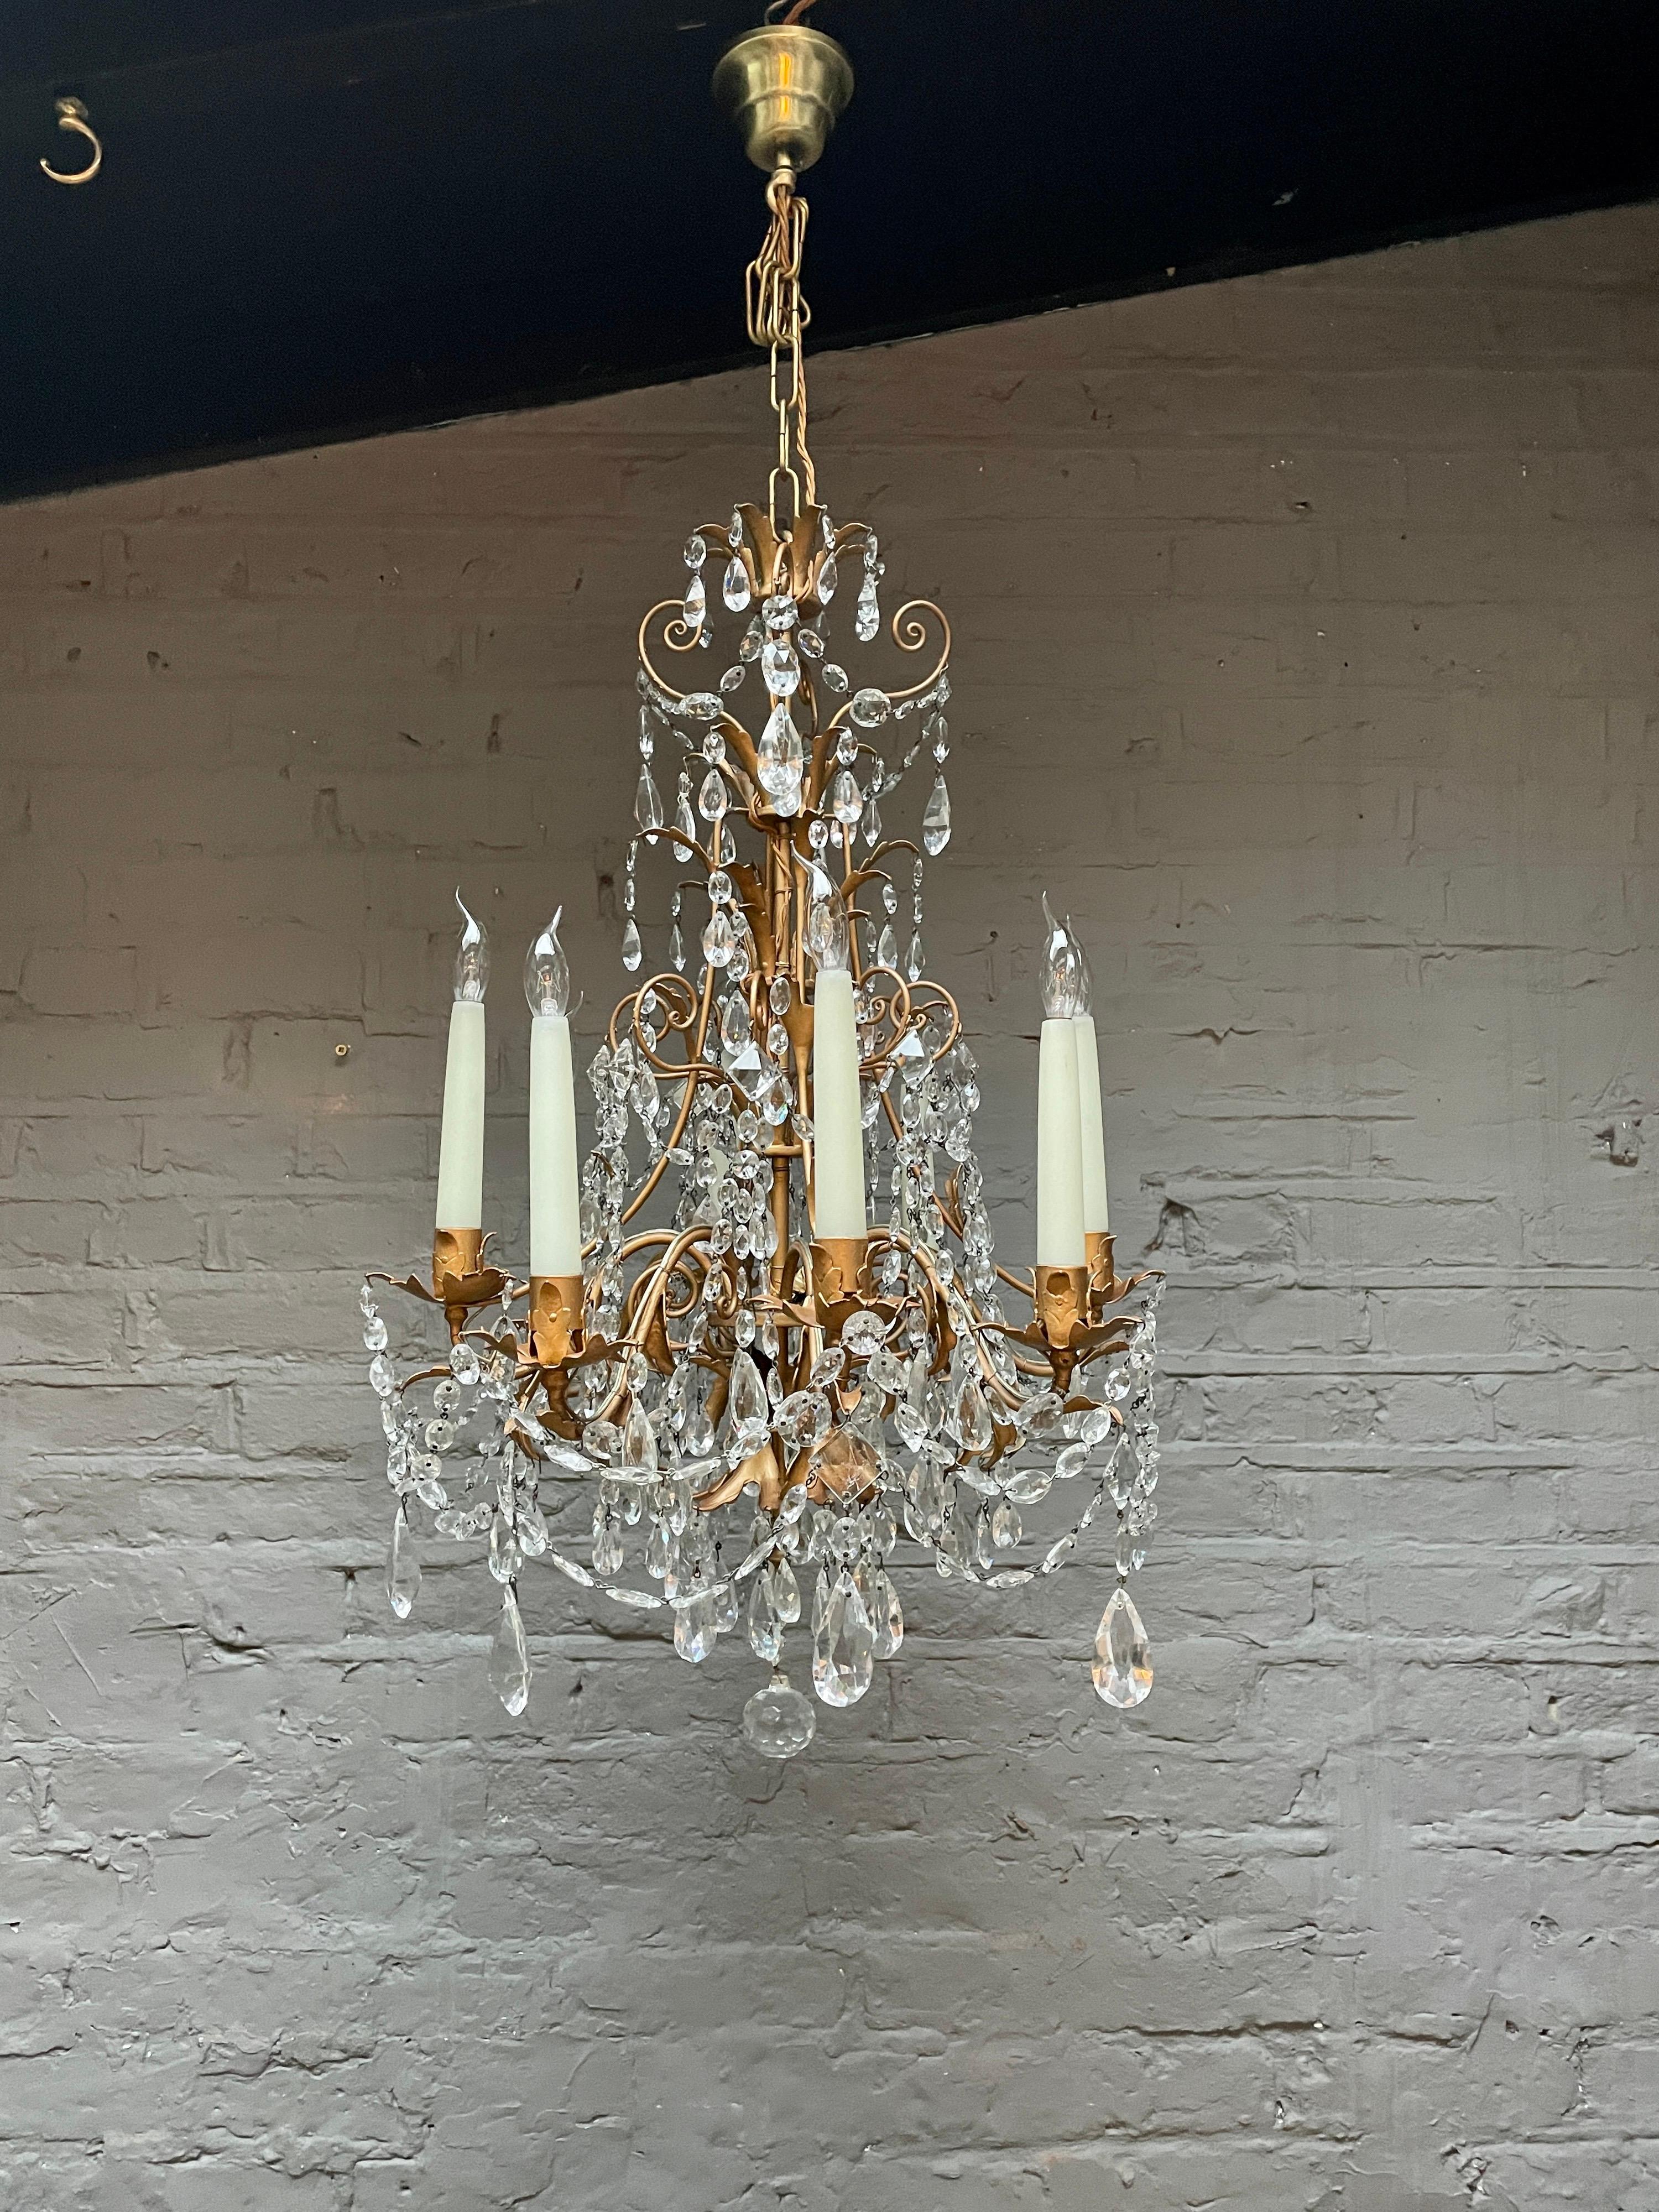 A decorative gilt tole and crystal chandelier from the mid 20th century, probably Italian rather than French, with eight arms having long slim and tapering candle holders which are supported on alternately raised arms, dressed in crystal with around